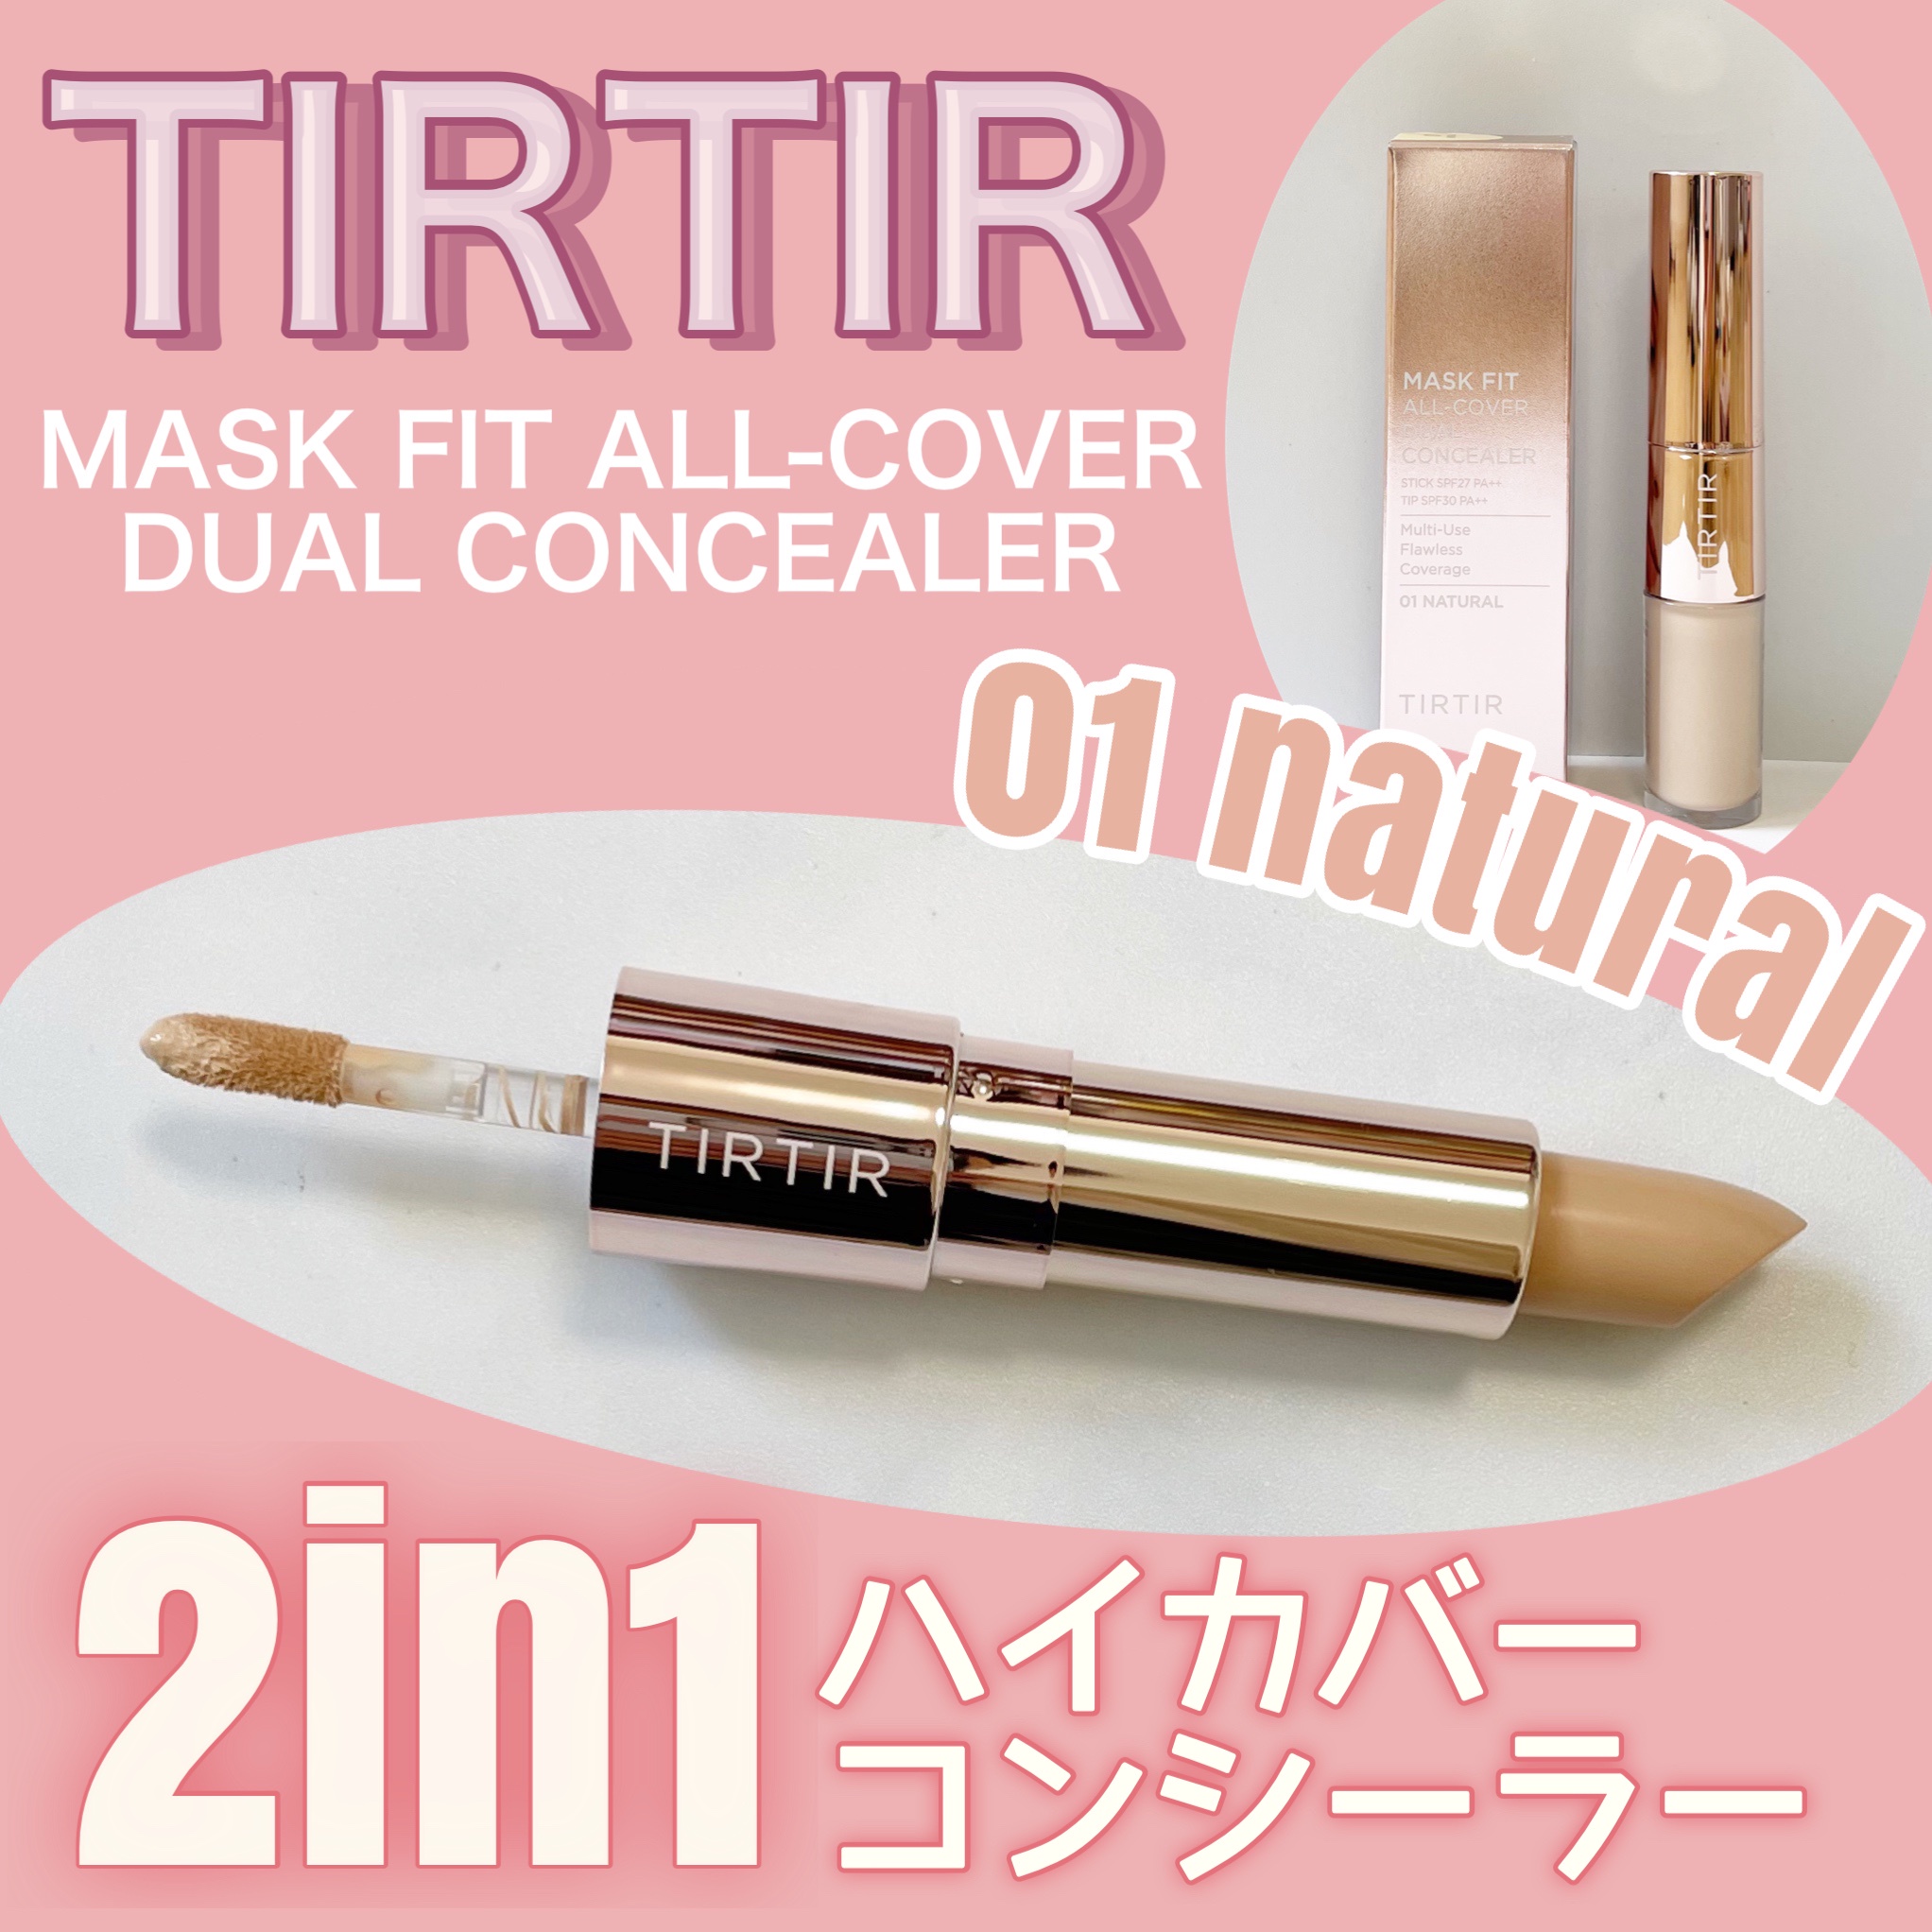 MASK FIT ALL-COVER DUAL CONCEALER - コンシーラー